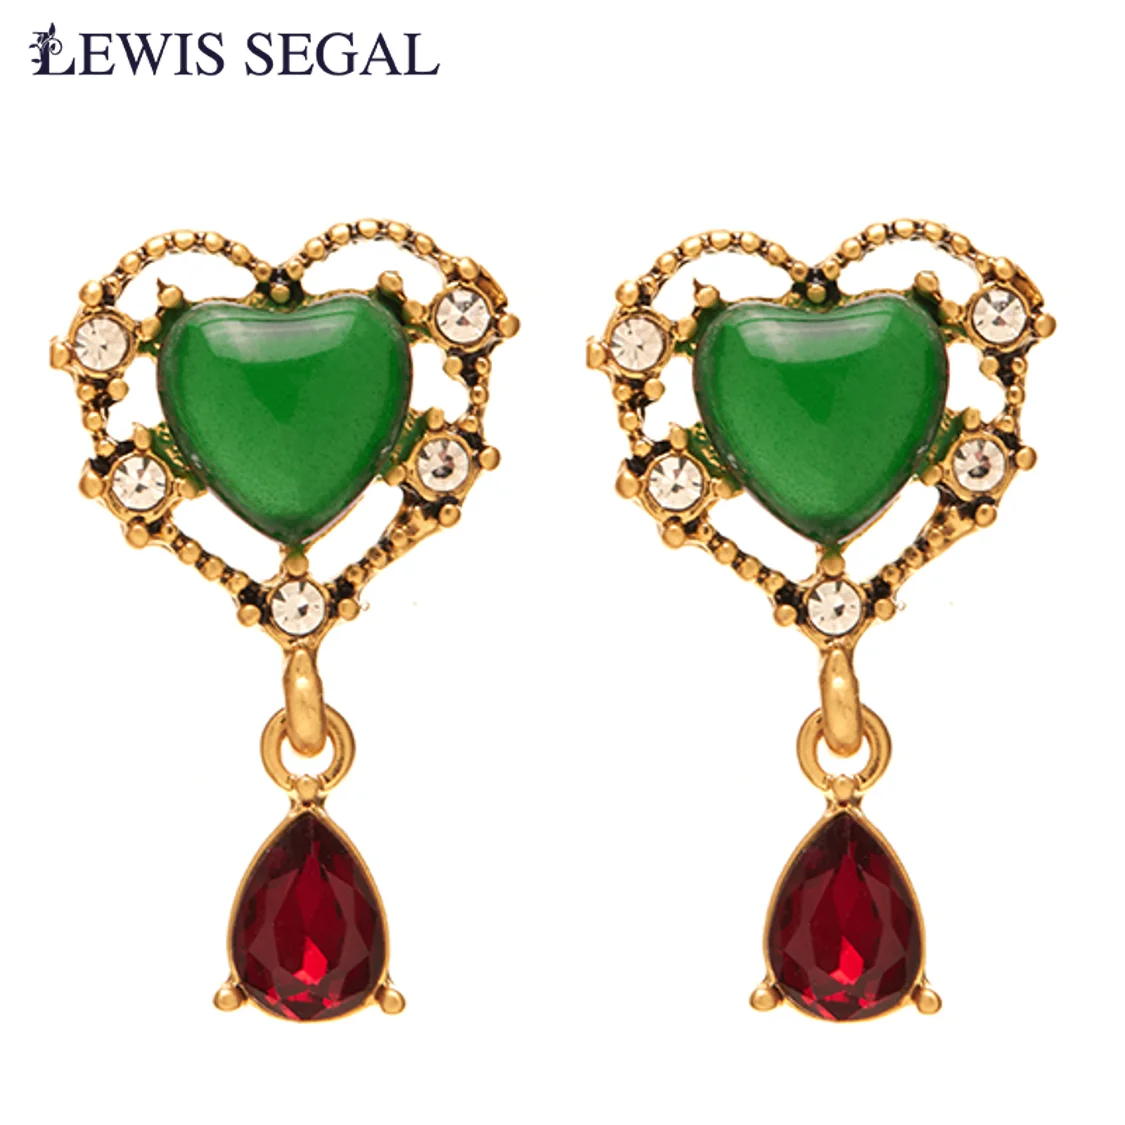 

LEWIS SEGAL Love Emerald Stud Earrings For Women Independent Girl Medieval Style Fine Jewelry 18K Real Gold Plated